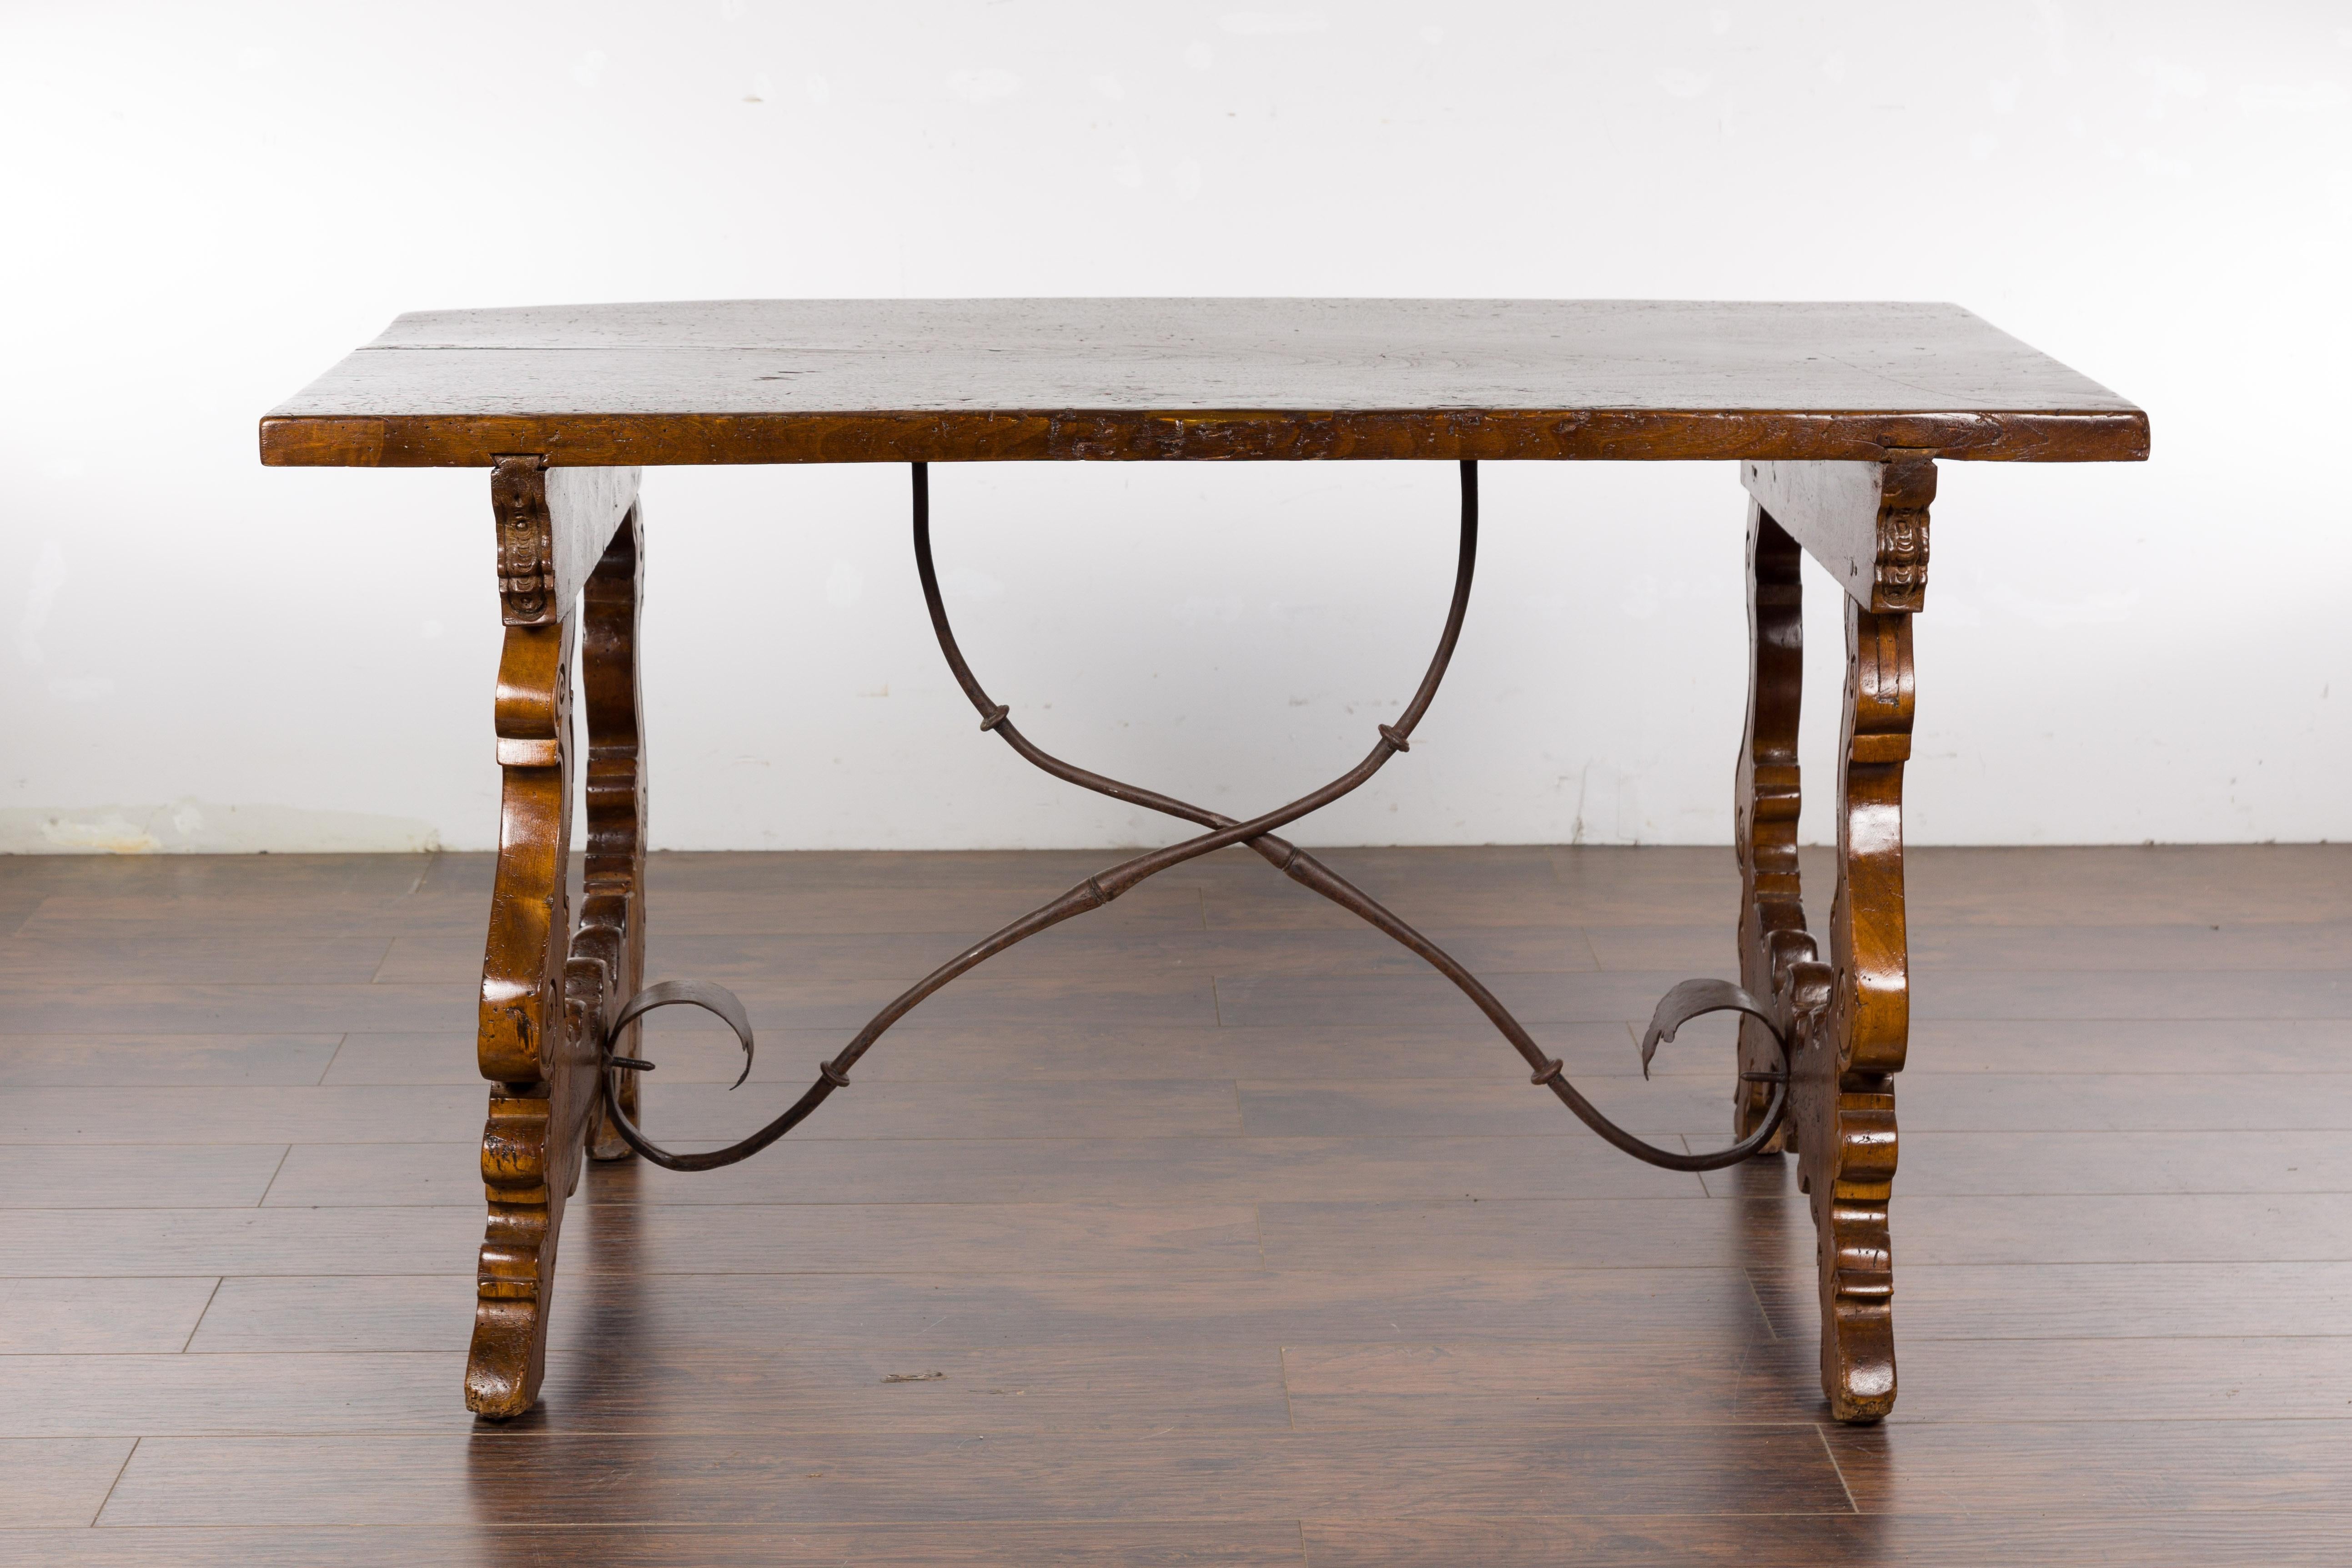 An Italian Baroque style walnut Fratino console table from the 19th century with carved lyre shaped legs and iron stretchers. Add a touch of opulence to your home with this stunning Italian Baroque style console table from the 19th century. Crafted